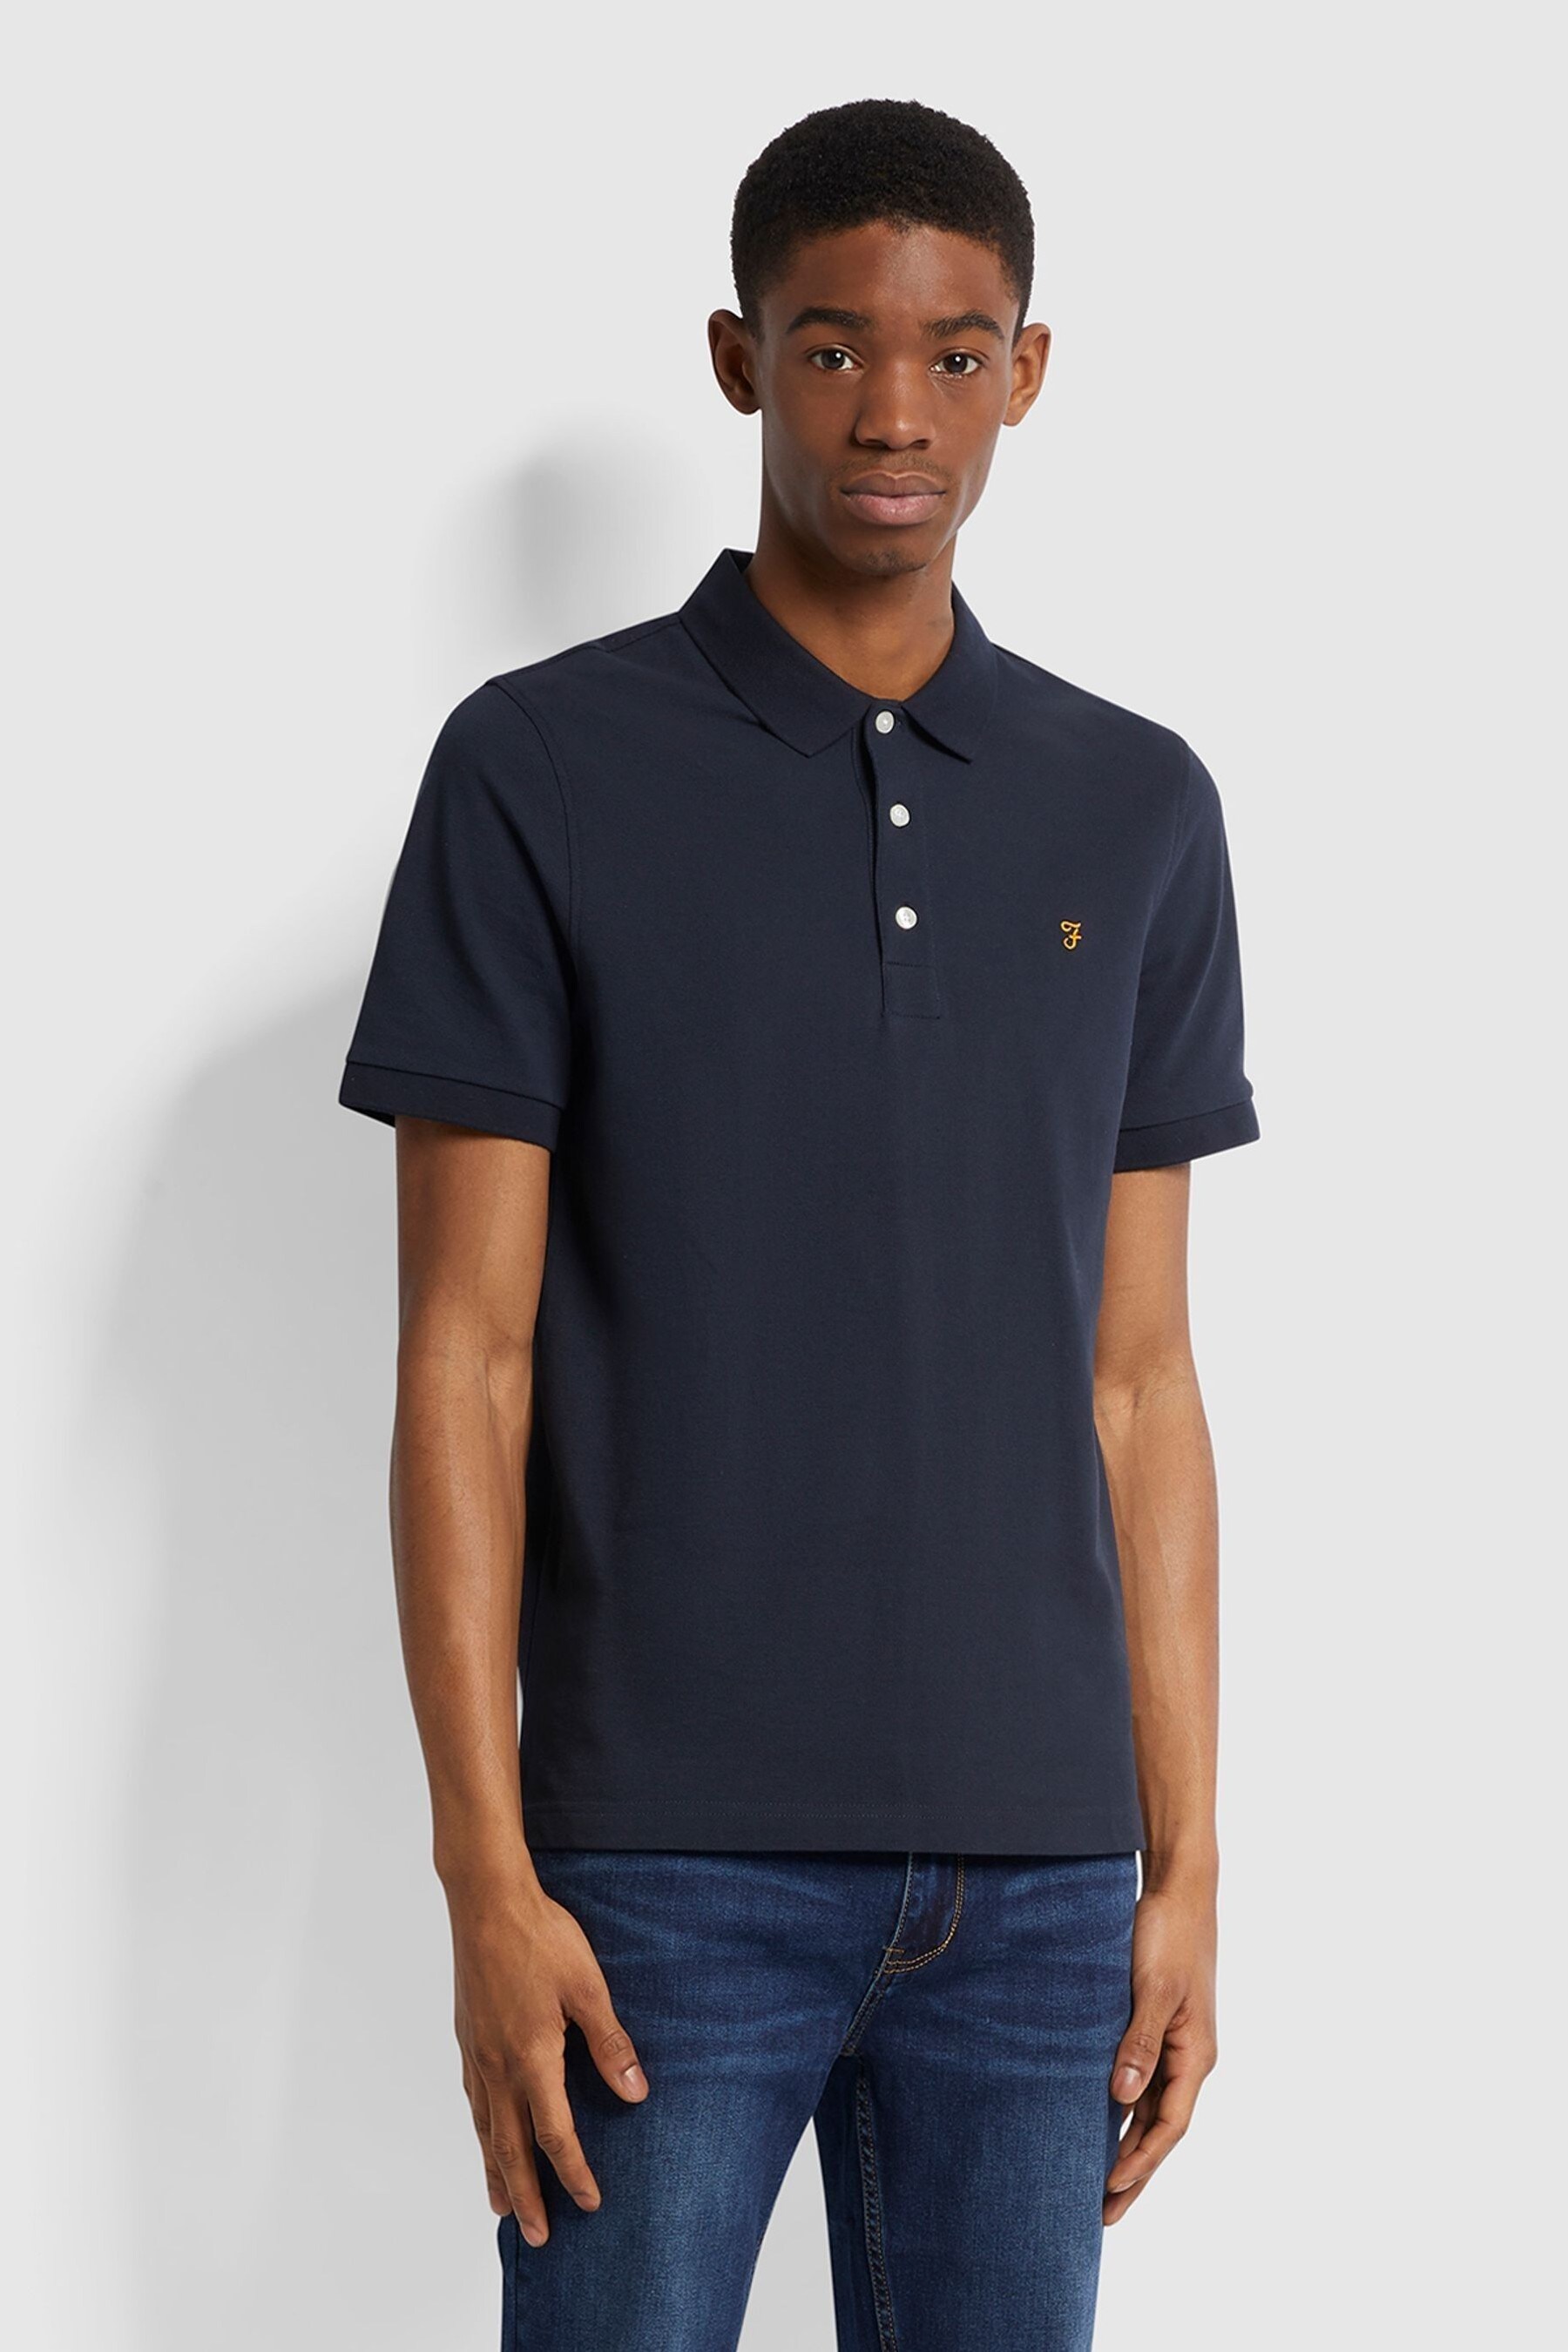 Buy Farah Blanes Short Sleeved Polo Shirt from the Next UK online shop